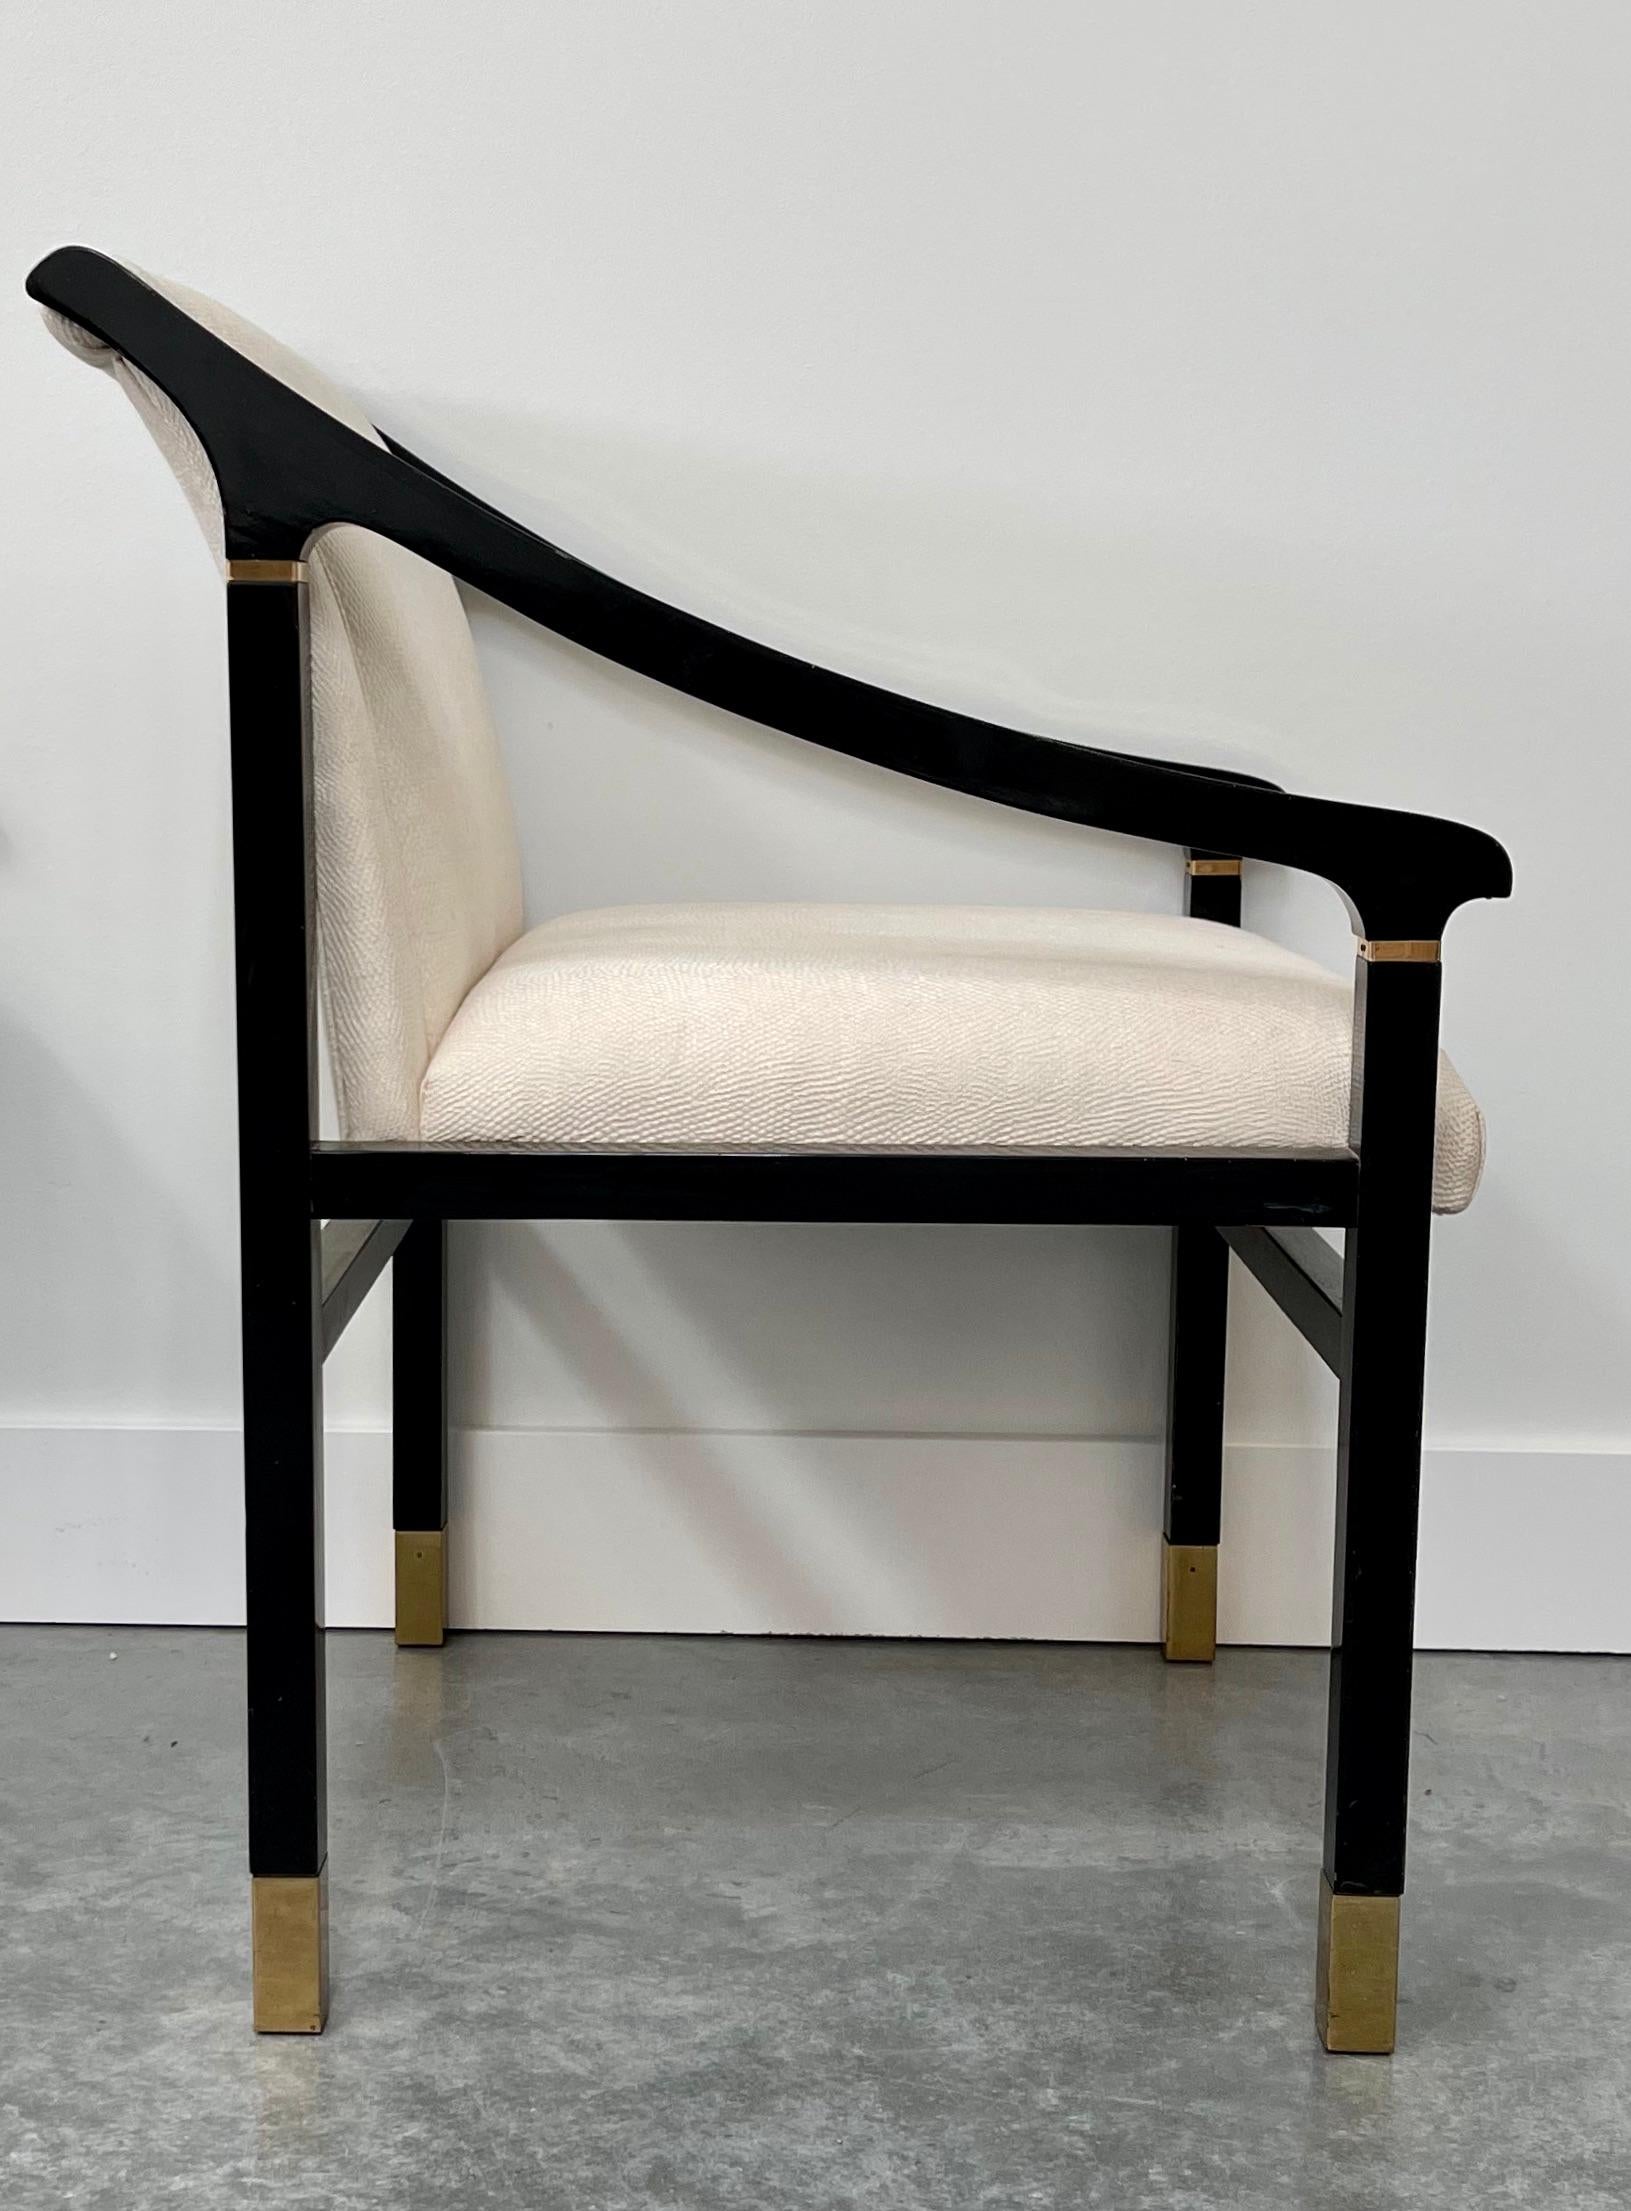 Hollywood Regency style dining chairs by Mastercraft. These sleek Mid-Century Modern sculptural arm chairs have unique sloped arm rests, curved back rests, original black lacquer wood H-frames with gold/brass metal trim and brass metal inlaid